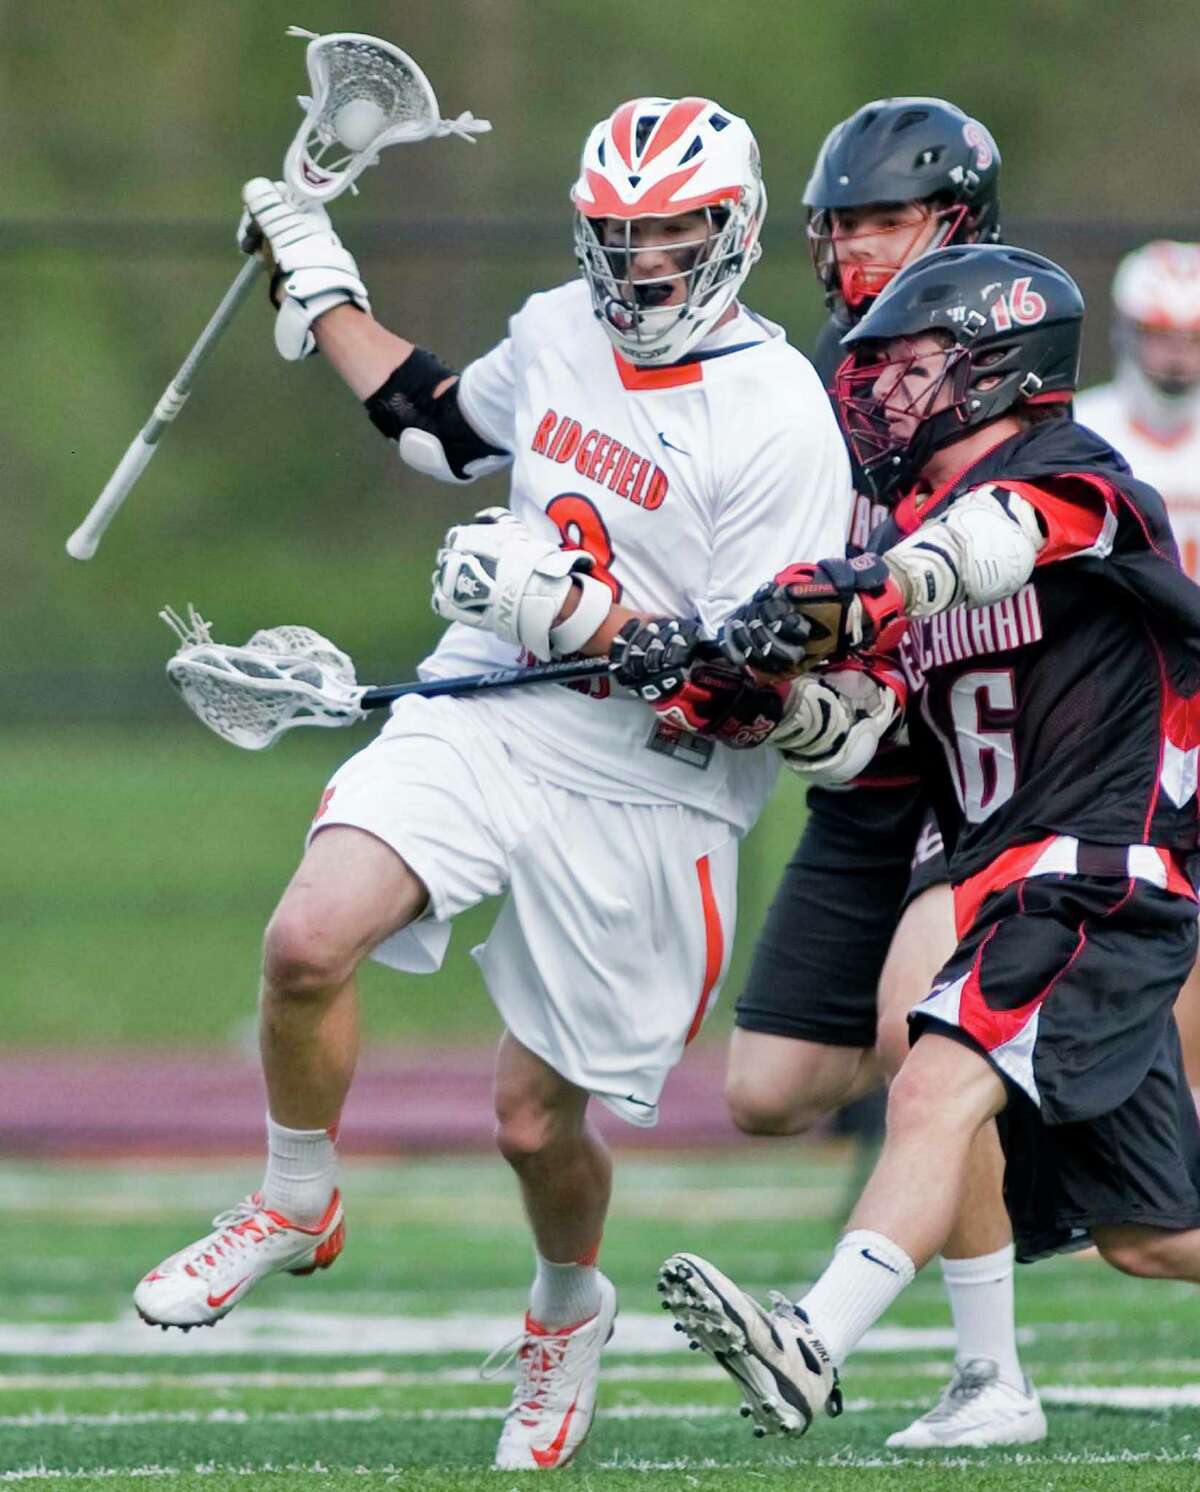 Ridgefield High School's Tim Cozens tries to get by New Canaan High School's Henry Stanton during a game against , played at Ridgefield. Thursday, May 9, 2013